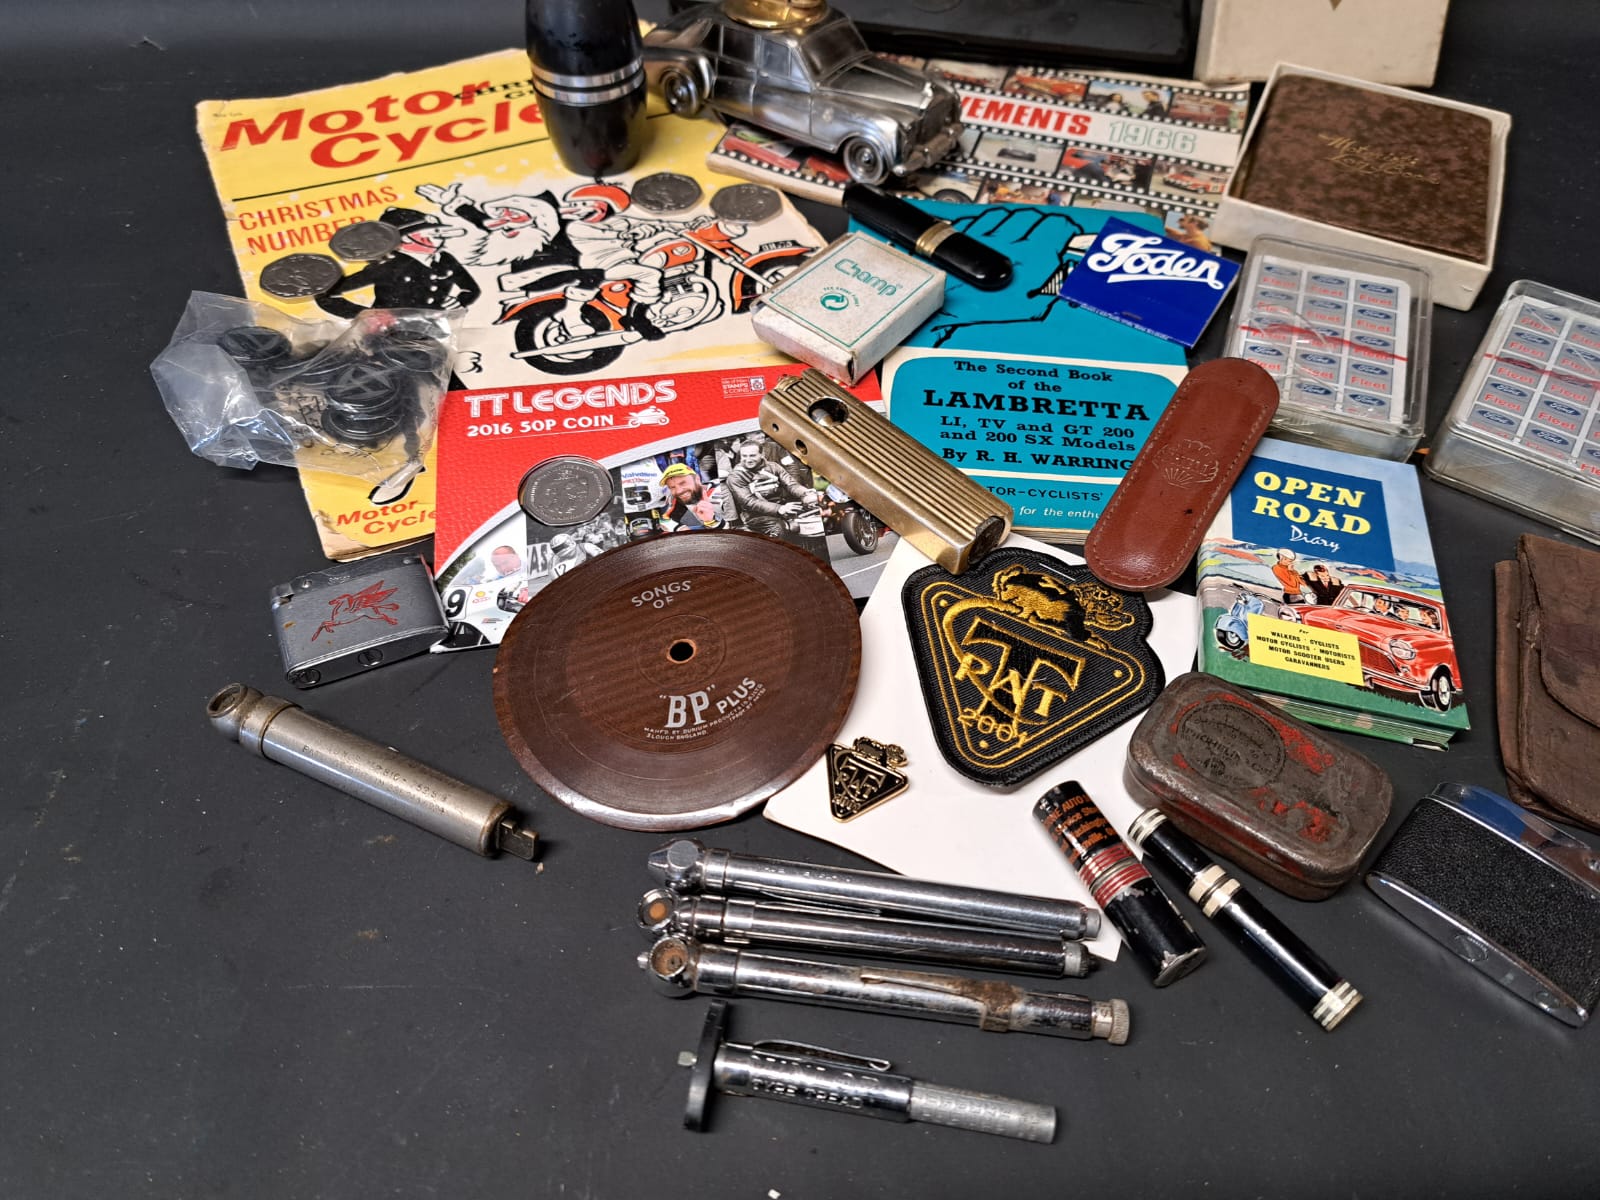 A tray of mixed motoring ephemera, collectables etc. including lighters, playing cards etc. - Image 4 of 4